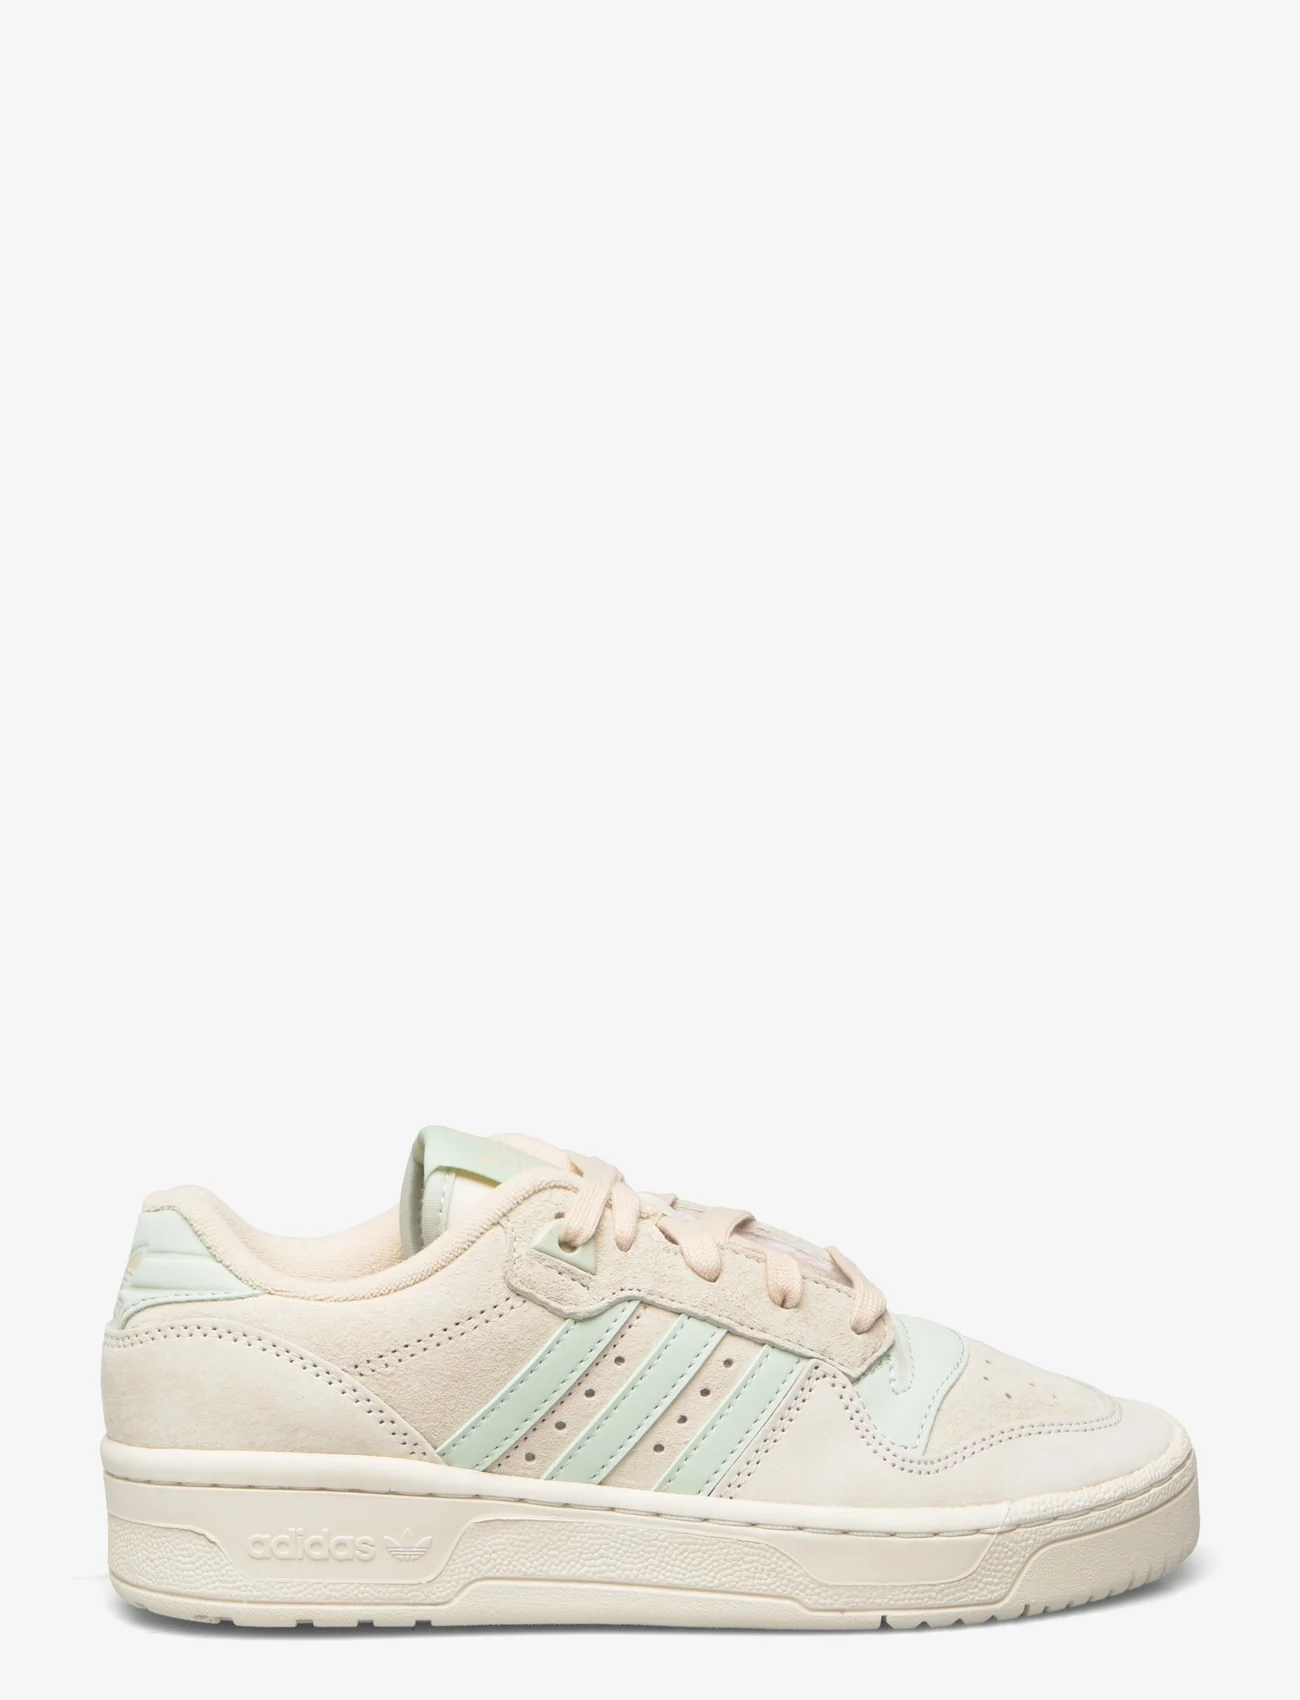 adidas Originals - RIVALRY LOW W - sneakers - cwhite/lingrn/owhite - 1